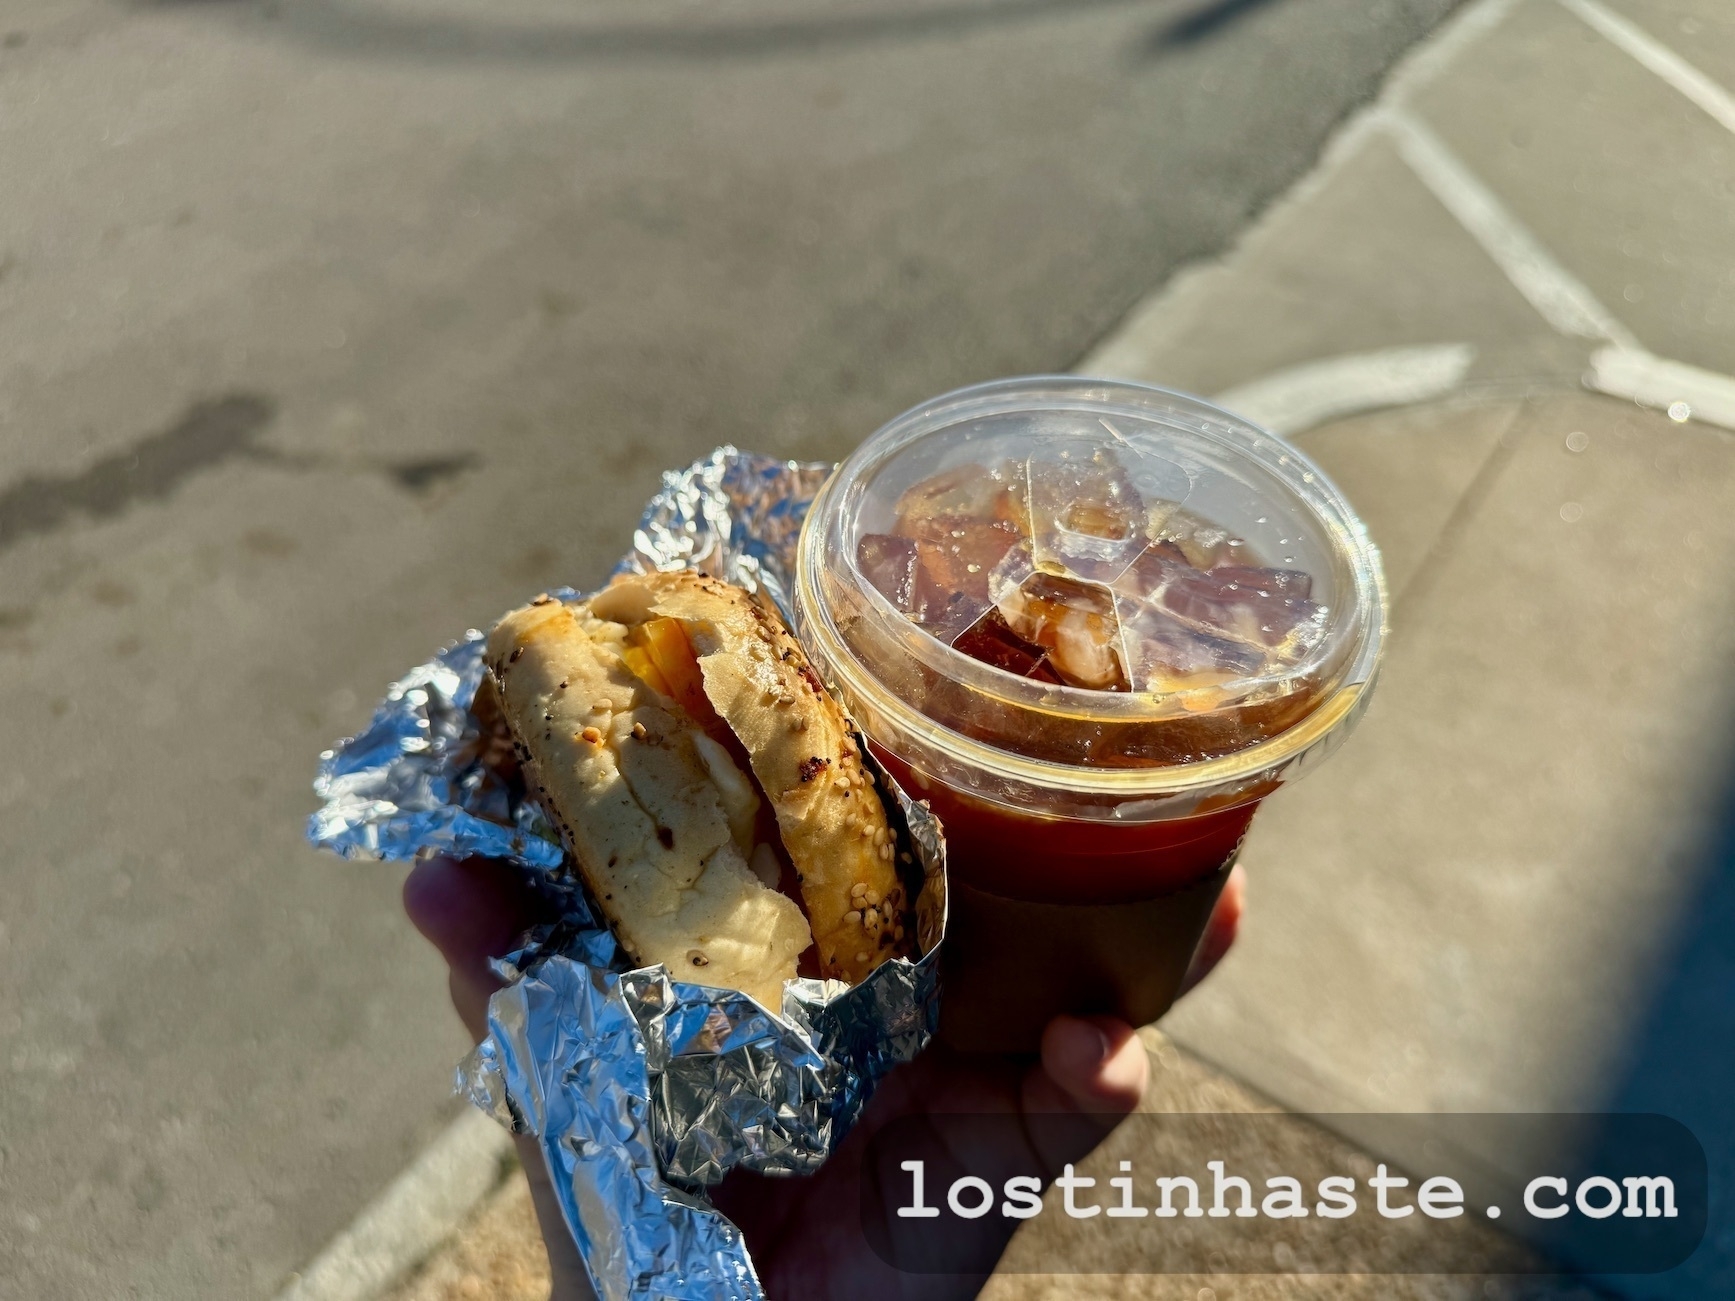 A hand holds a foil-wrapped egg bagel sandwich and an iced coffee against a blurred asphalt background. The text lostinhaste.com' is superimposed at the bottom.